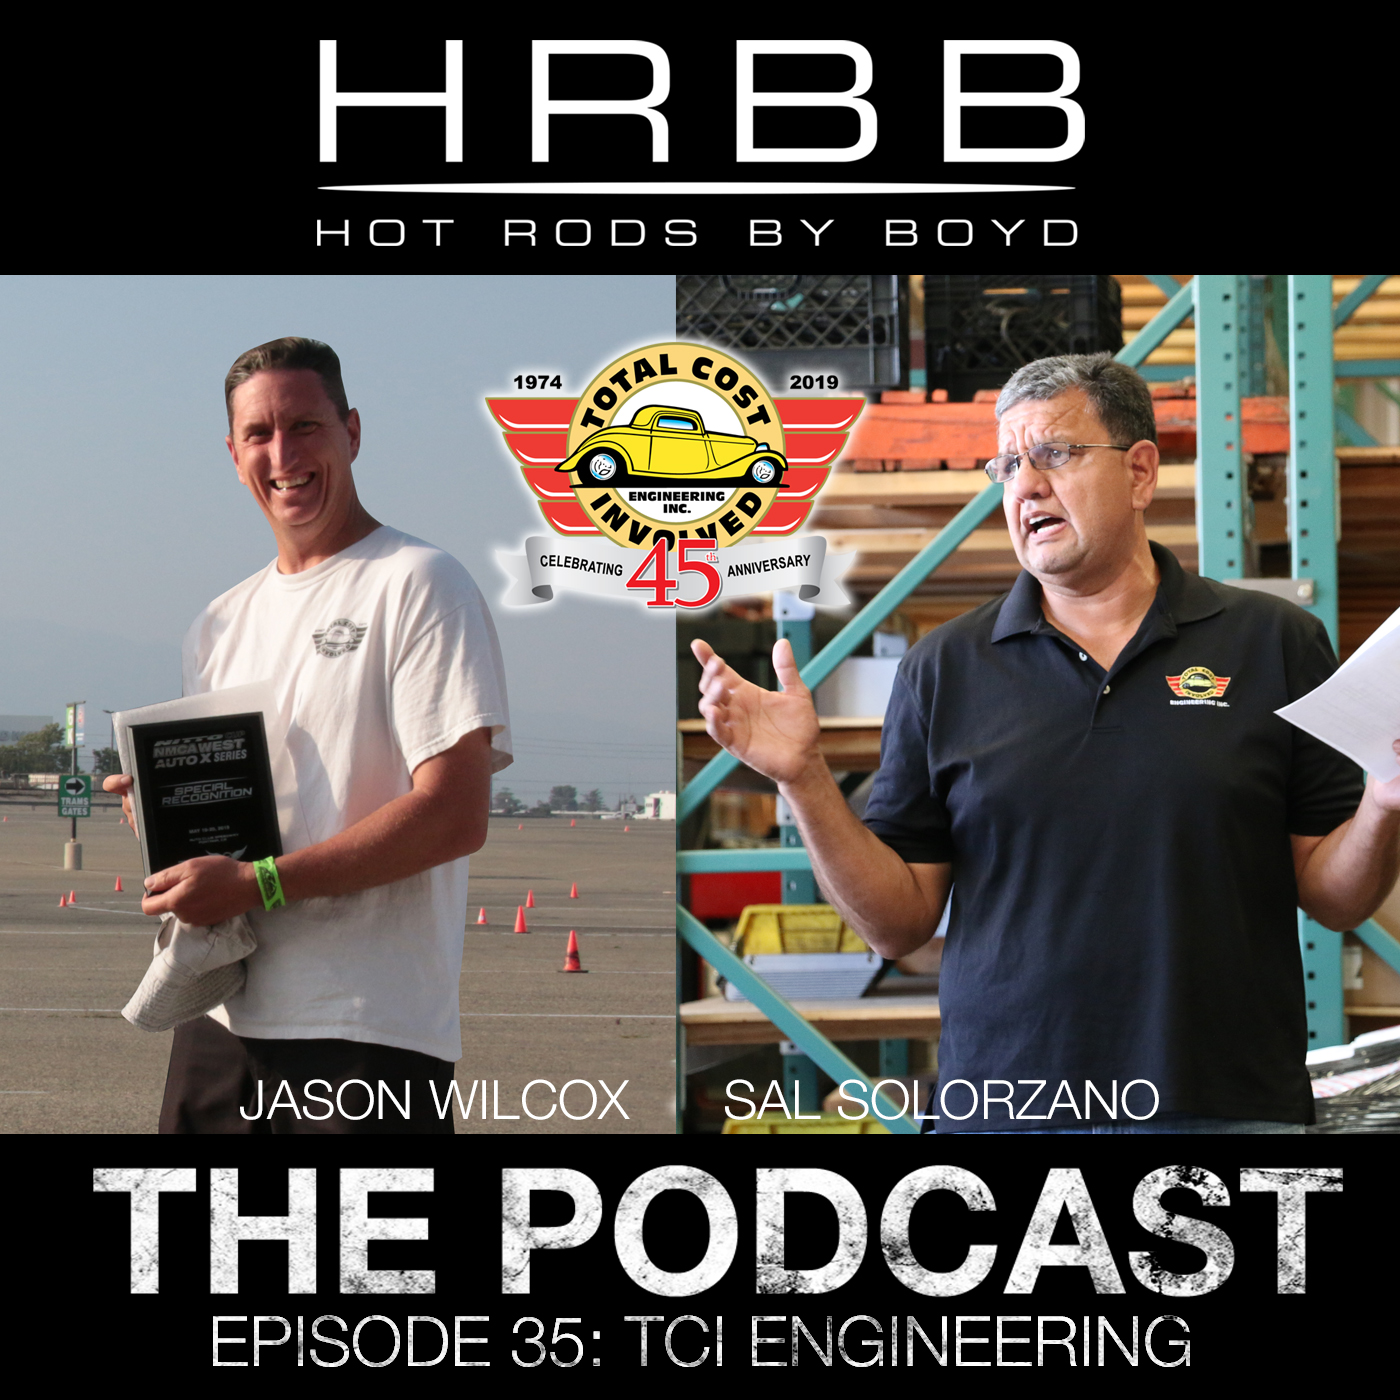 HRBB Podcast Ep35 - TCI Engineering